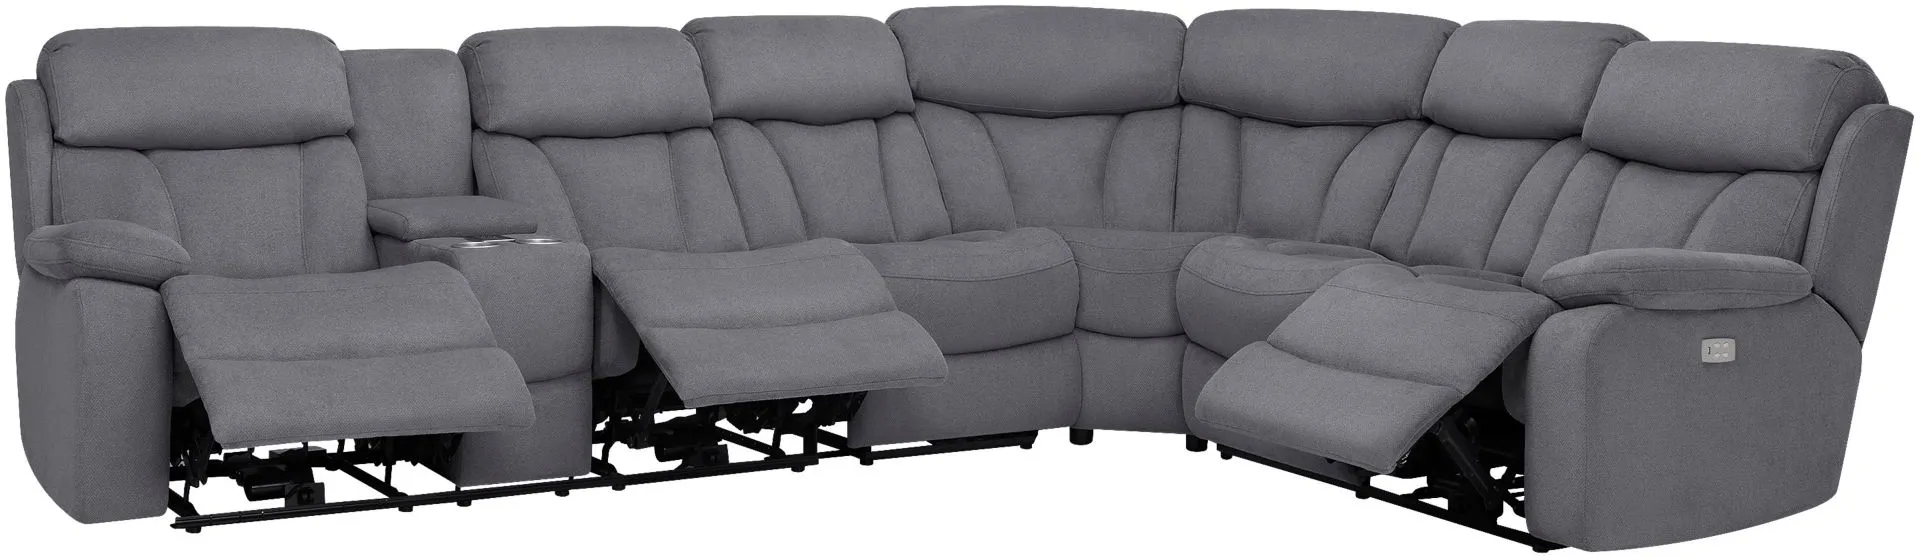 Bellanest Connell 4-pc. Power-Reclining Sectional Sofa w/ Heat and Massage in Graphite by Bellanest